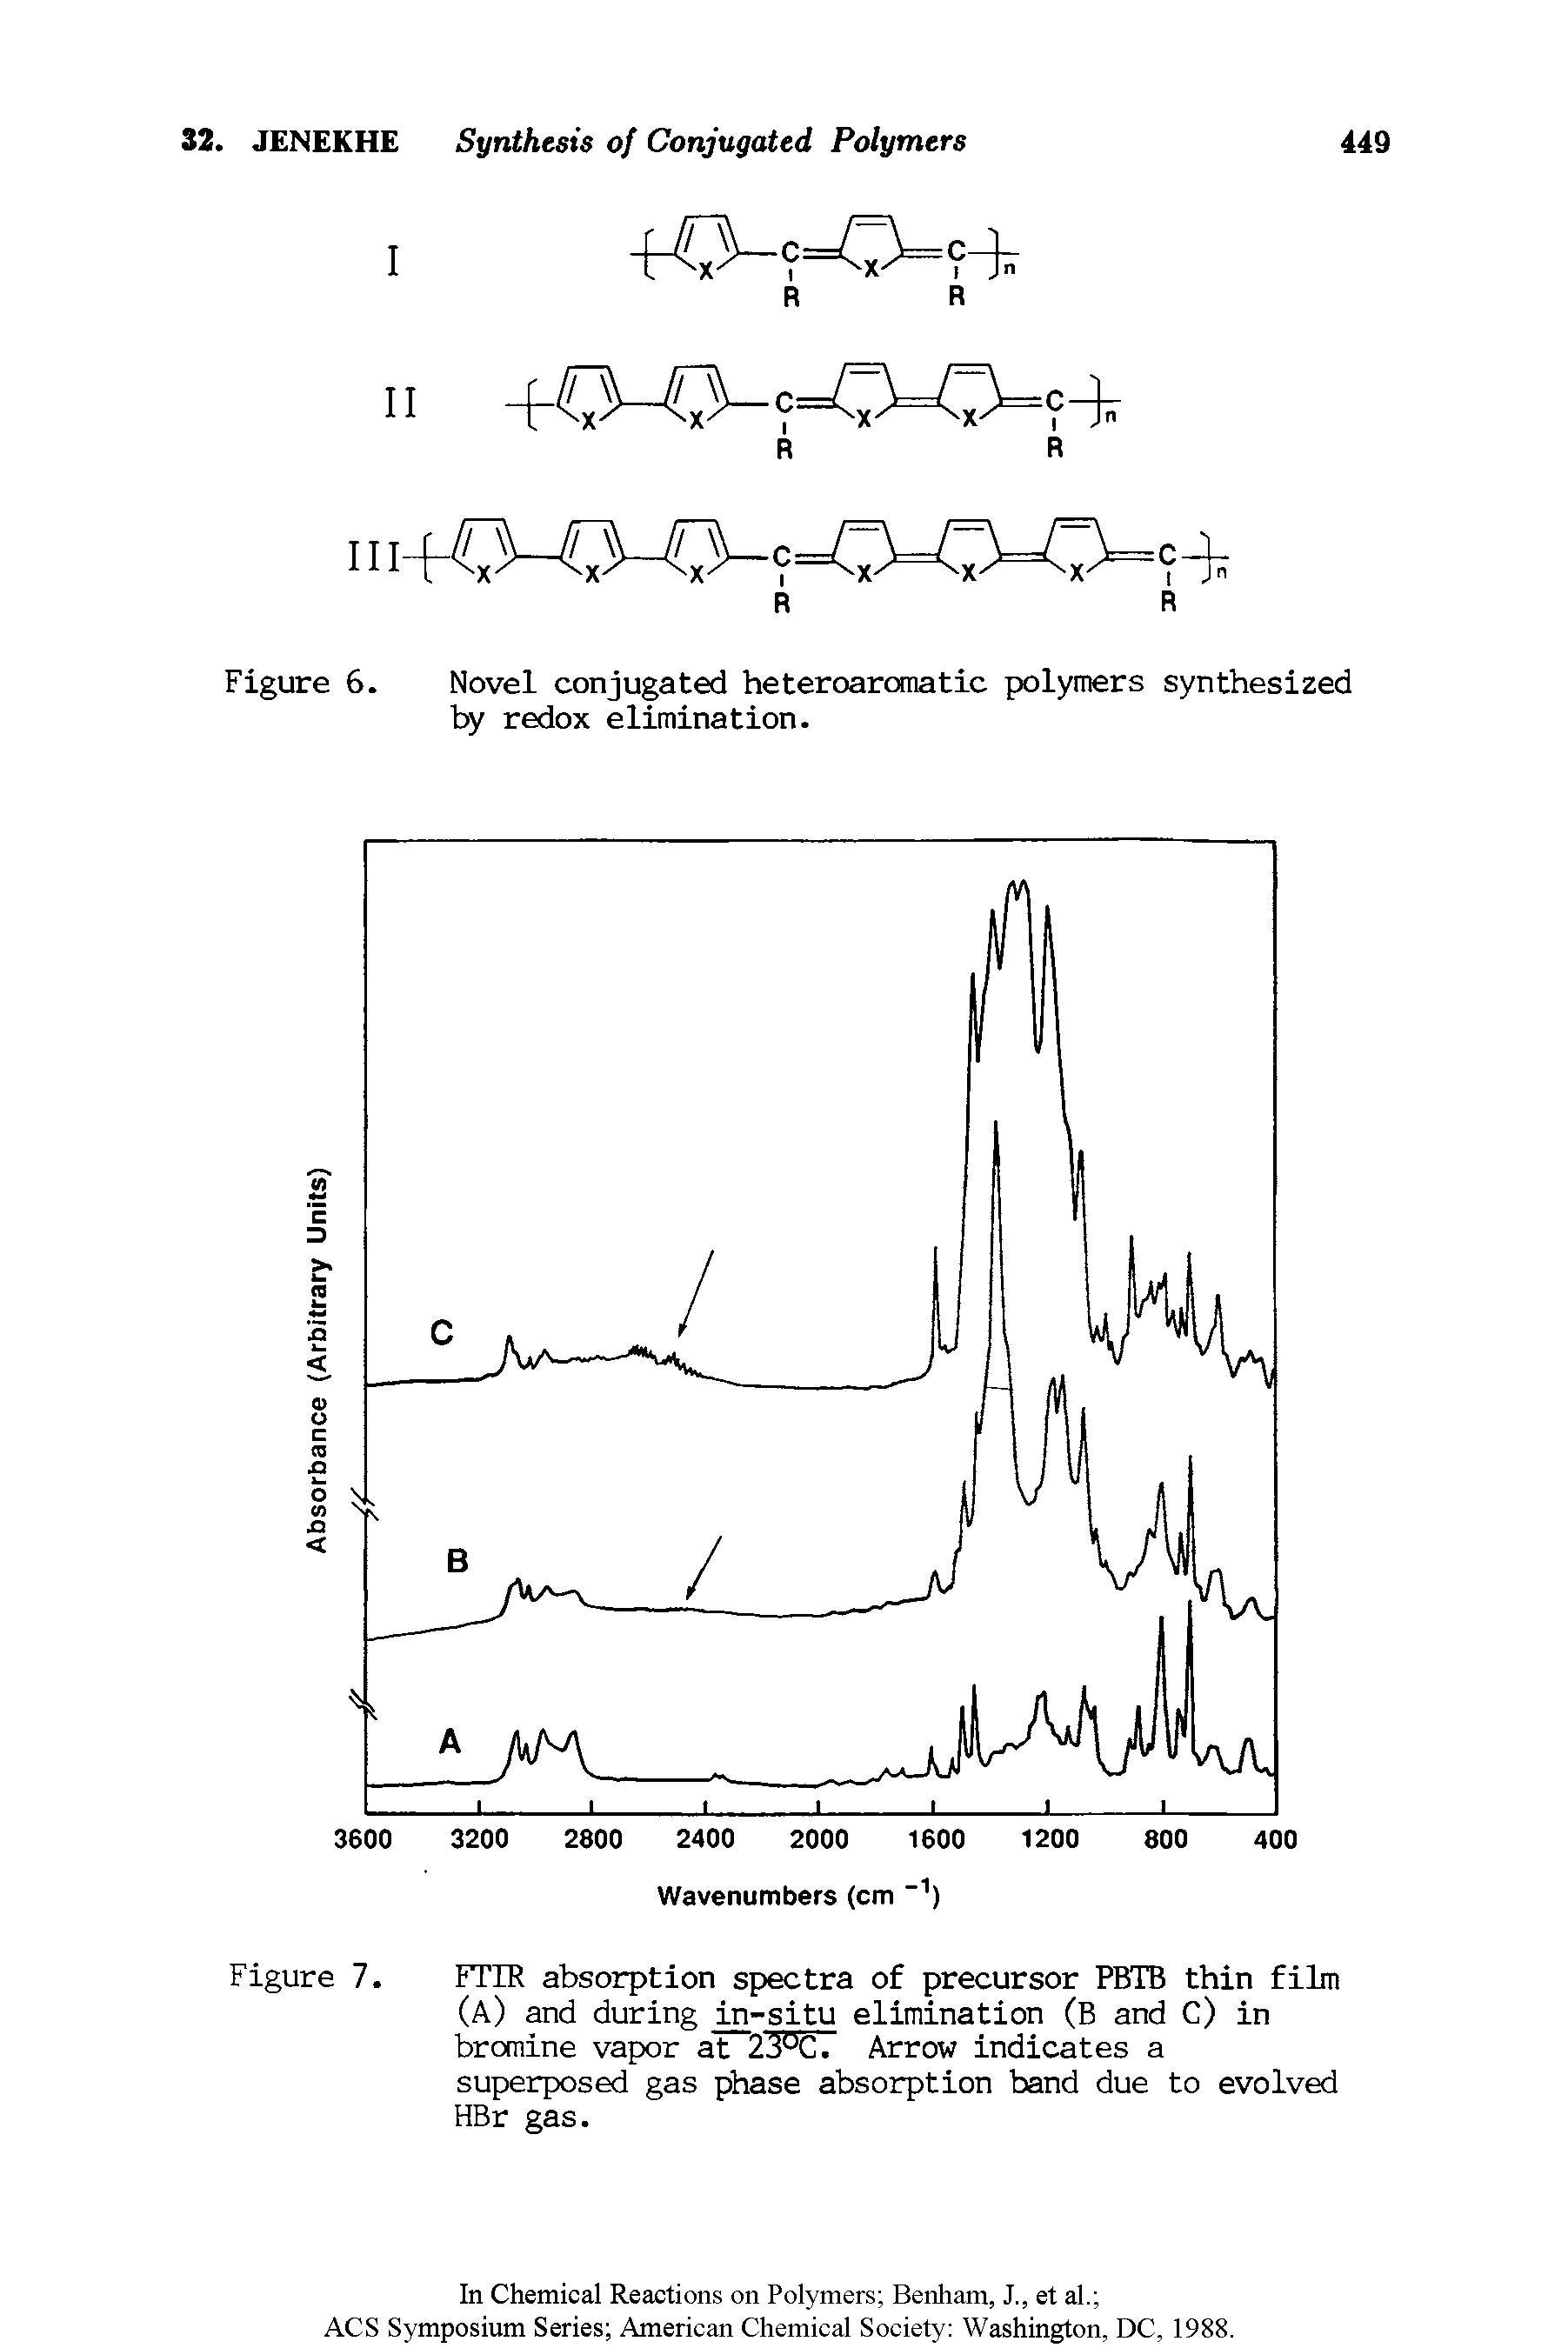 Figure 7. FTIR absorption spectra of precursor PBTB thin film (A) and during in-situ elimination (B and C) in bromine vapor at 23°C. Arrow indicates a superposed gas phase absorption band due to evolved HBr gas.